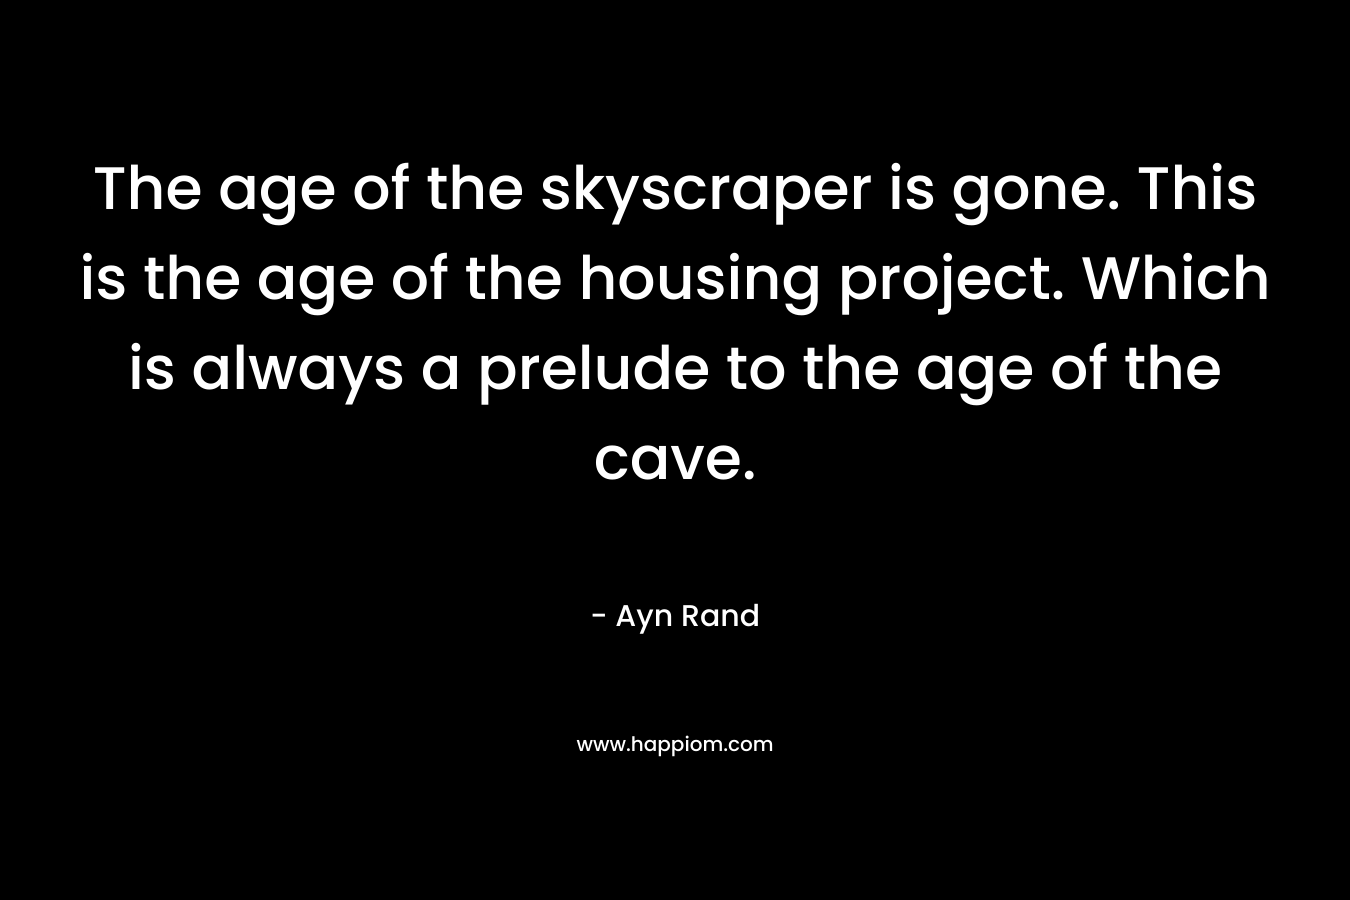 The age of the skyscraper is gone. This is the age of the housing project. Which is always a prelude to the age of the cave.